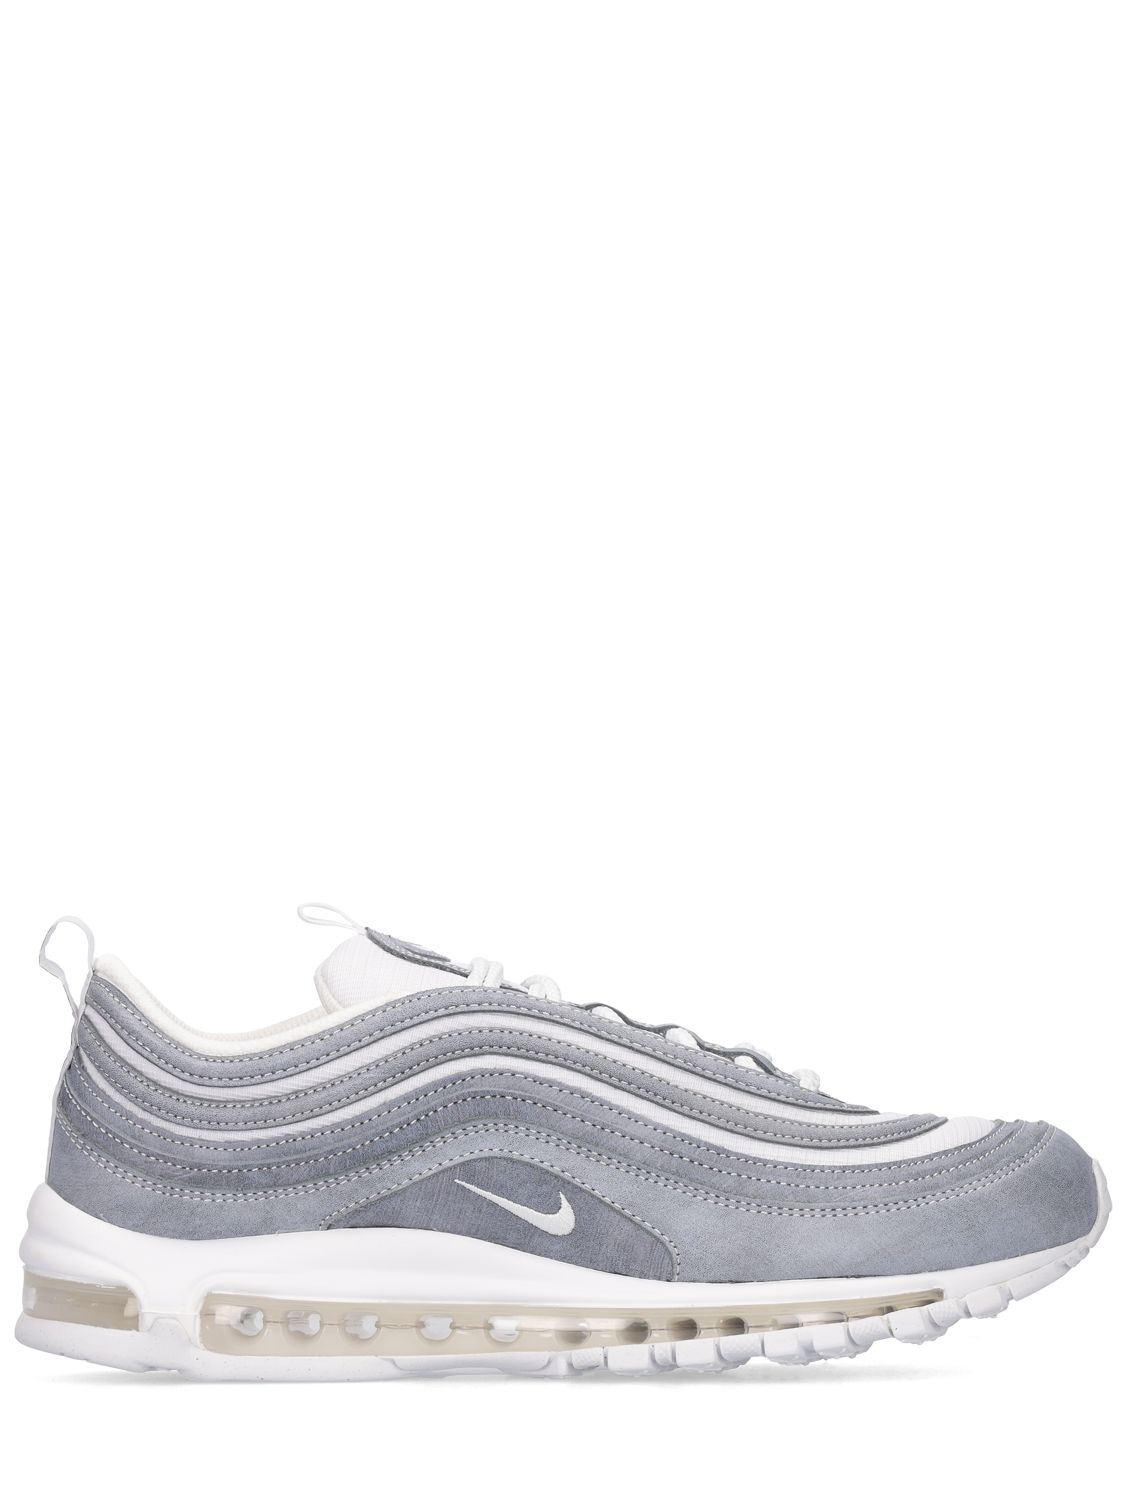 Comme Des Garçons Cdg Air Max 97 Sneakers In Grey